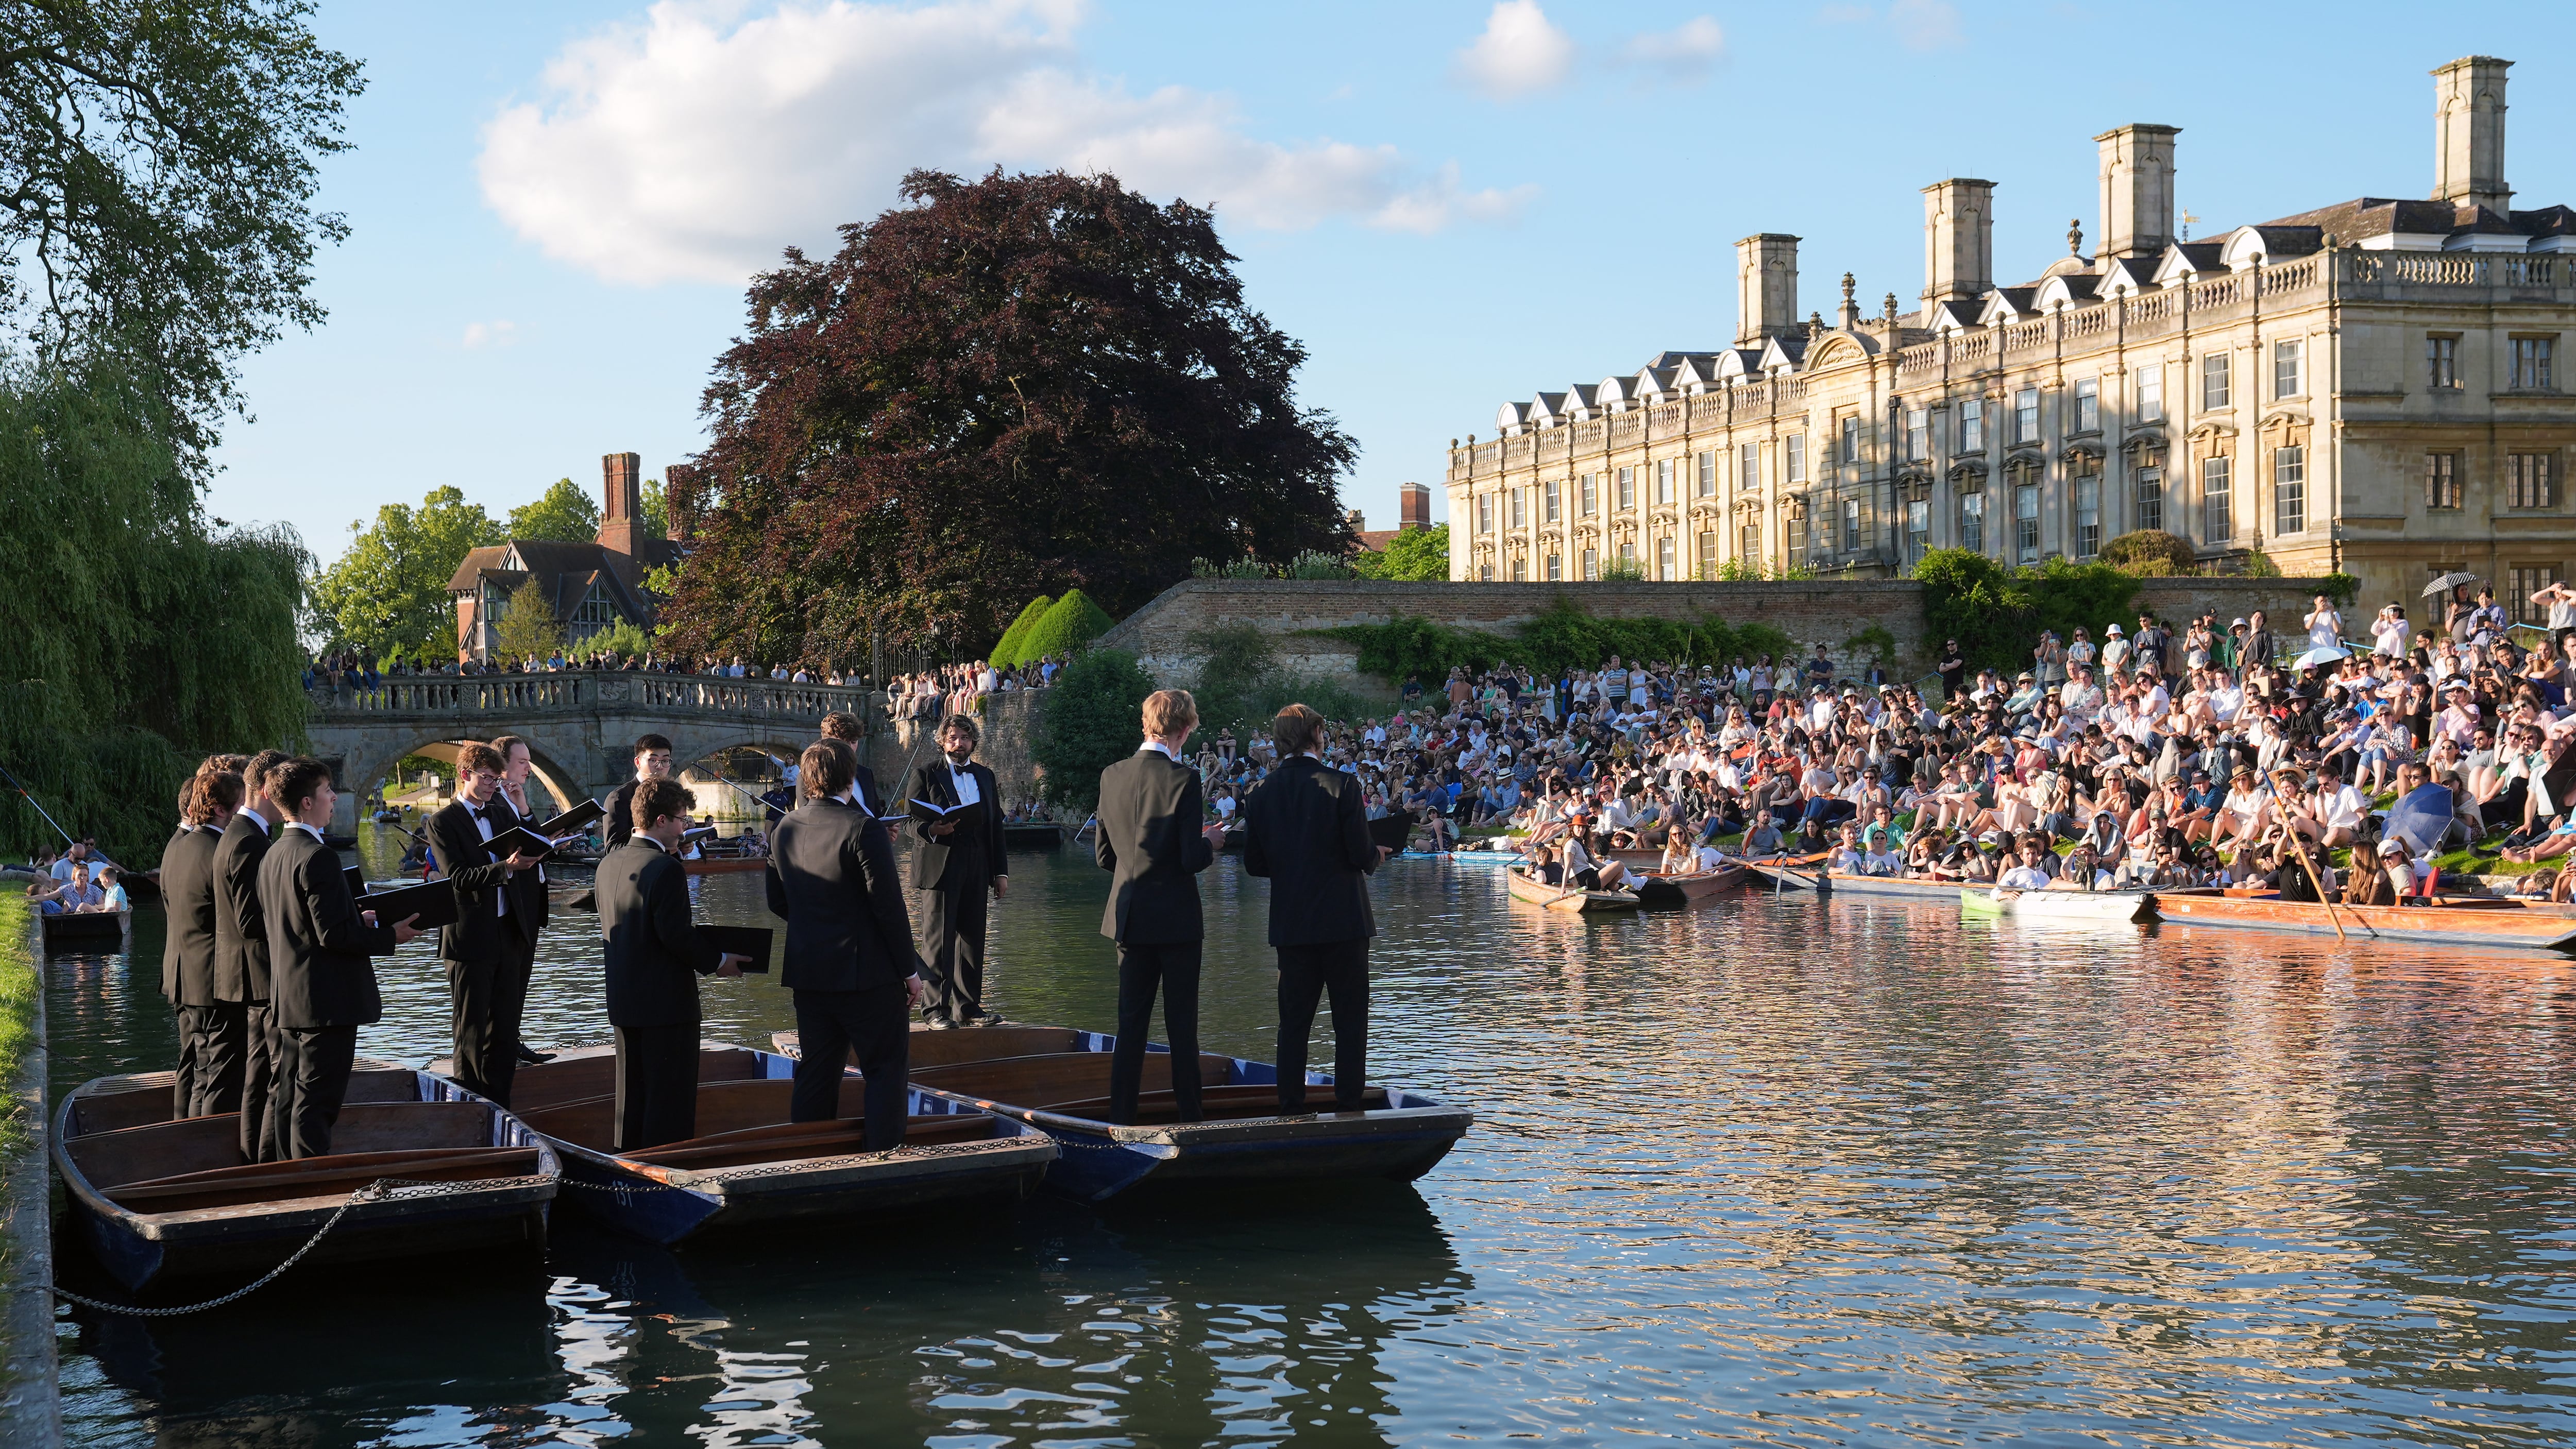 People sit on the banks of the River Cam and lawns of King’s College in Cambridge, as they listen to The King’s Men perform